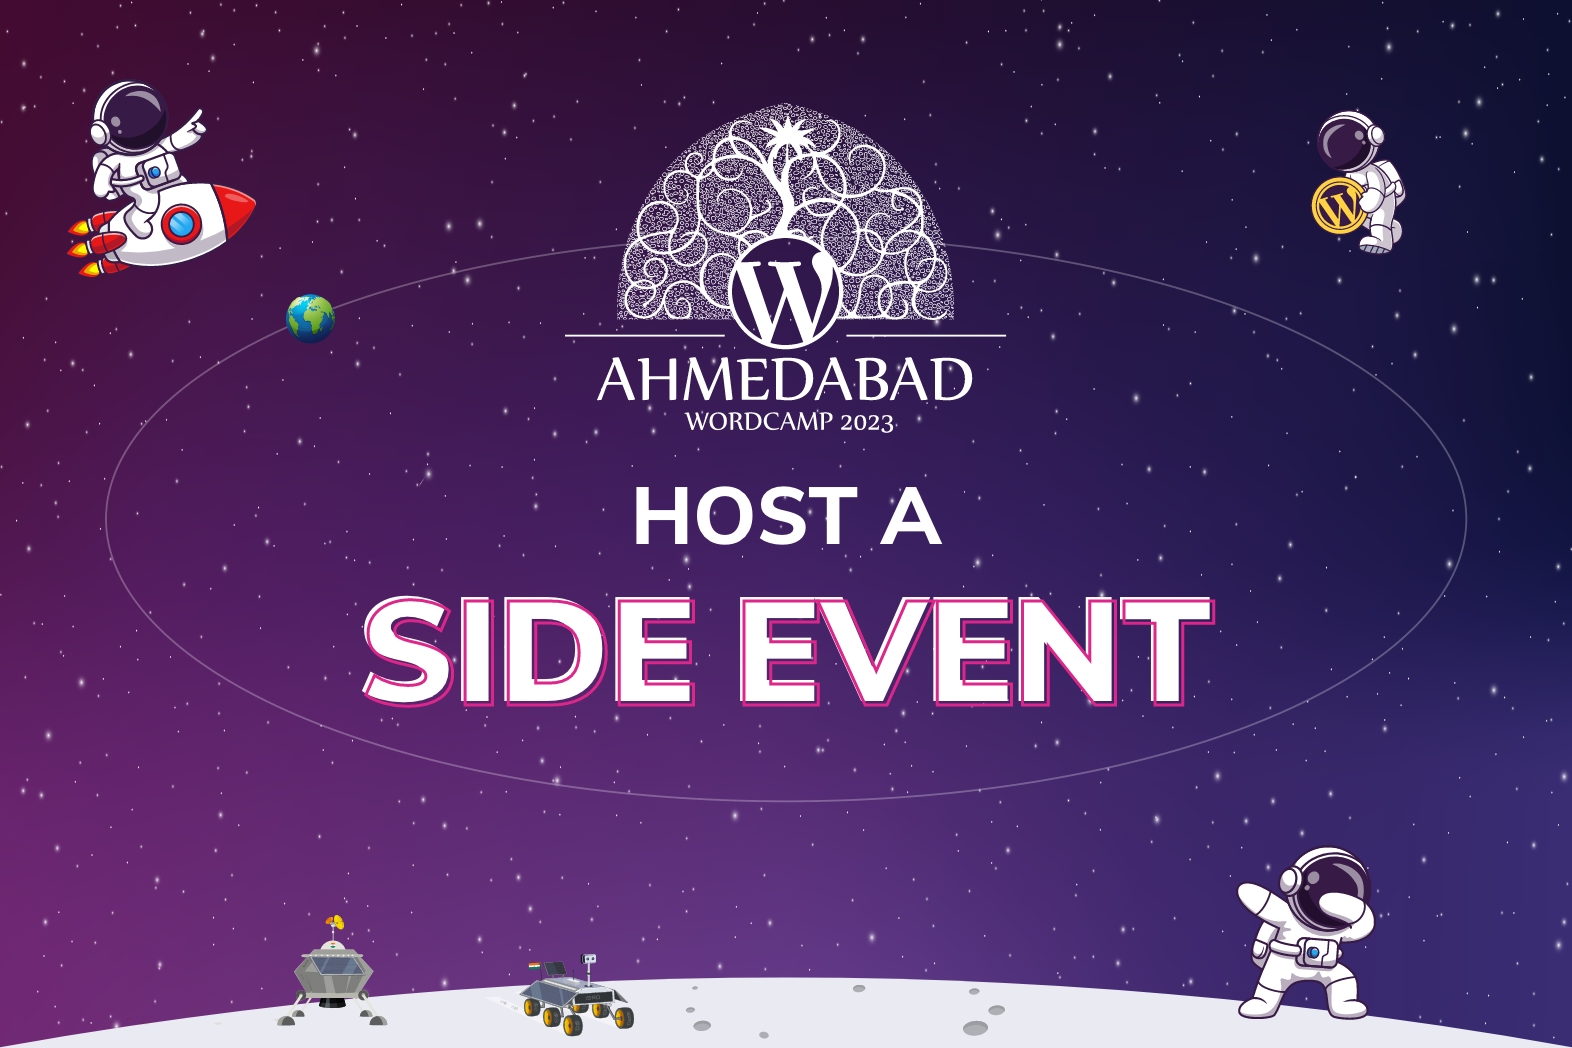 Host a Side Event